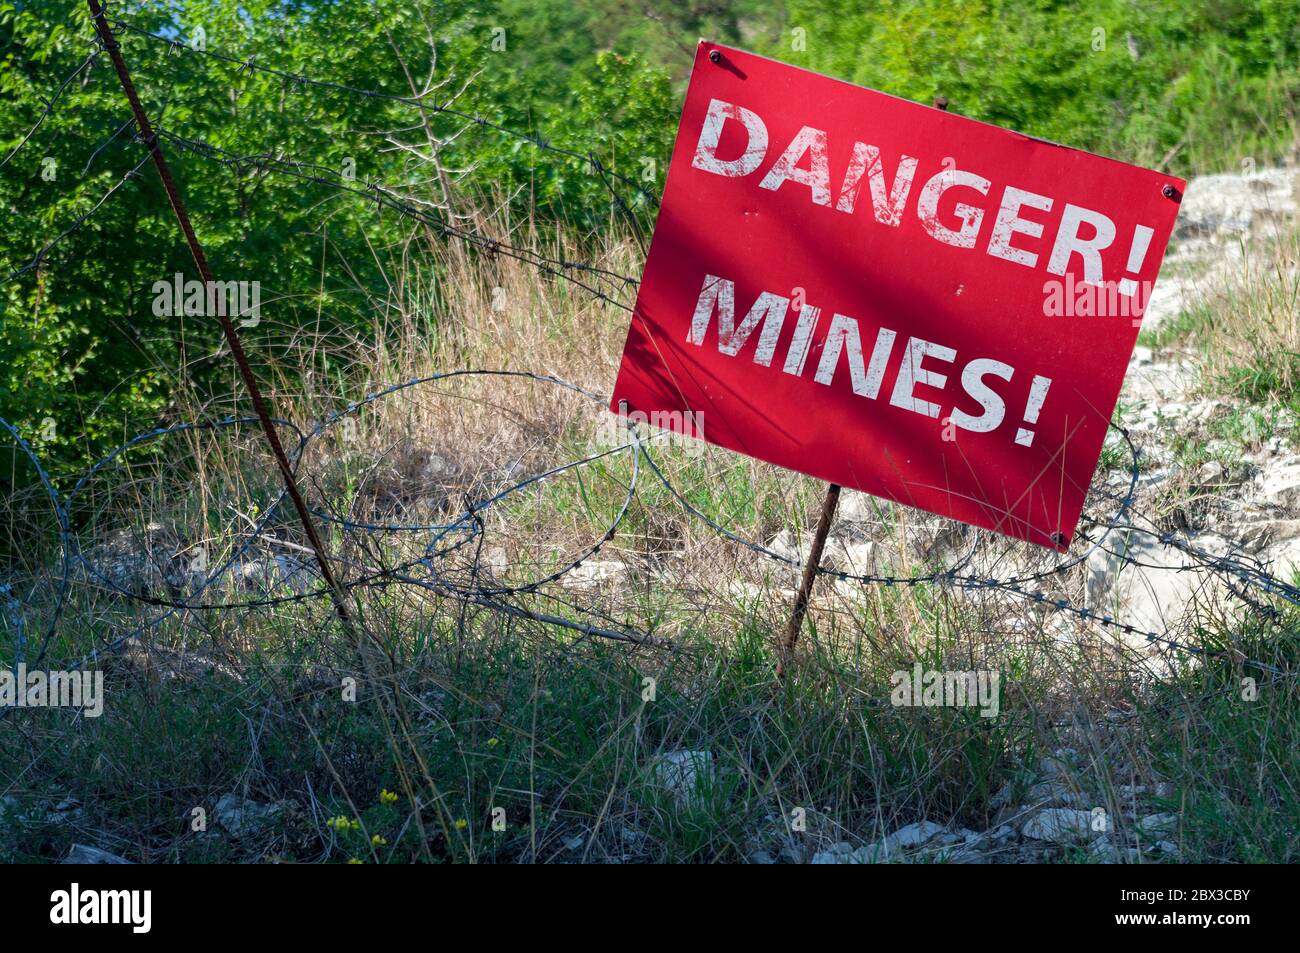 Red sign DANGER MINES in front of a minefield fenced with barbed wire Stock Photo